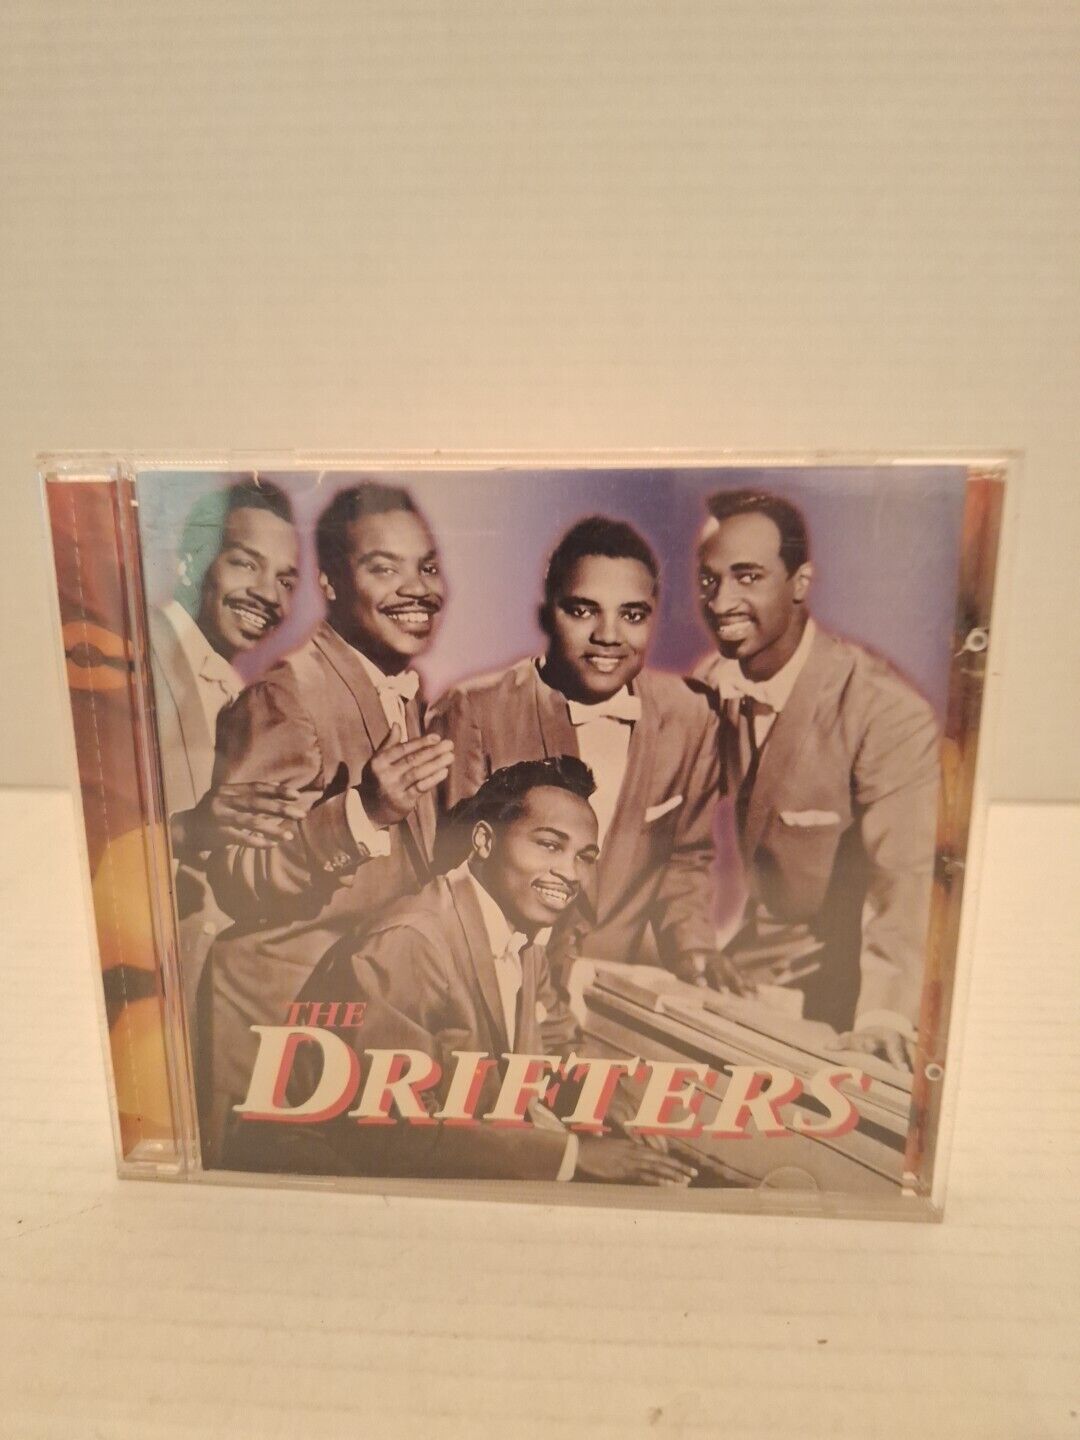 The Drifters On Broadway Cd Gently Used Free Shipping. 